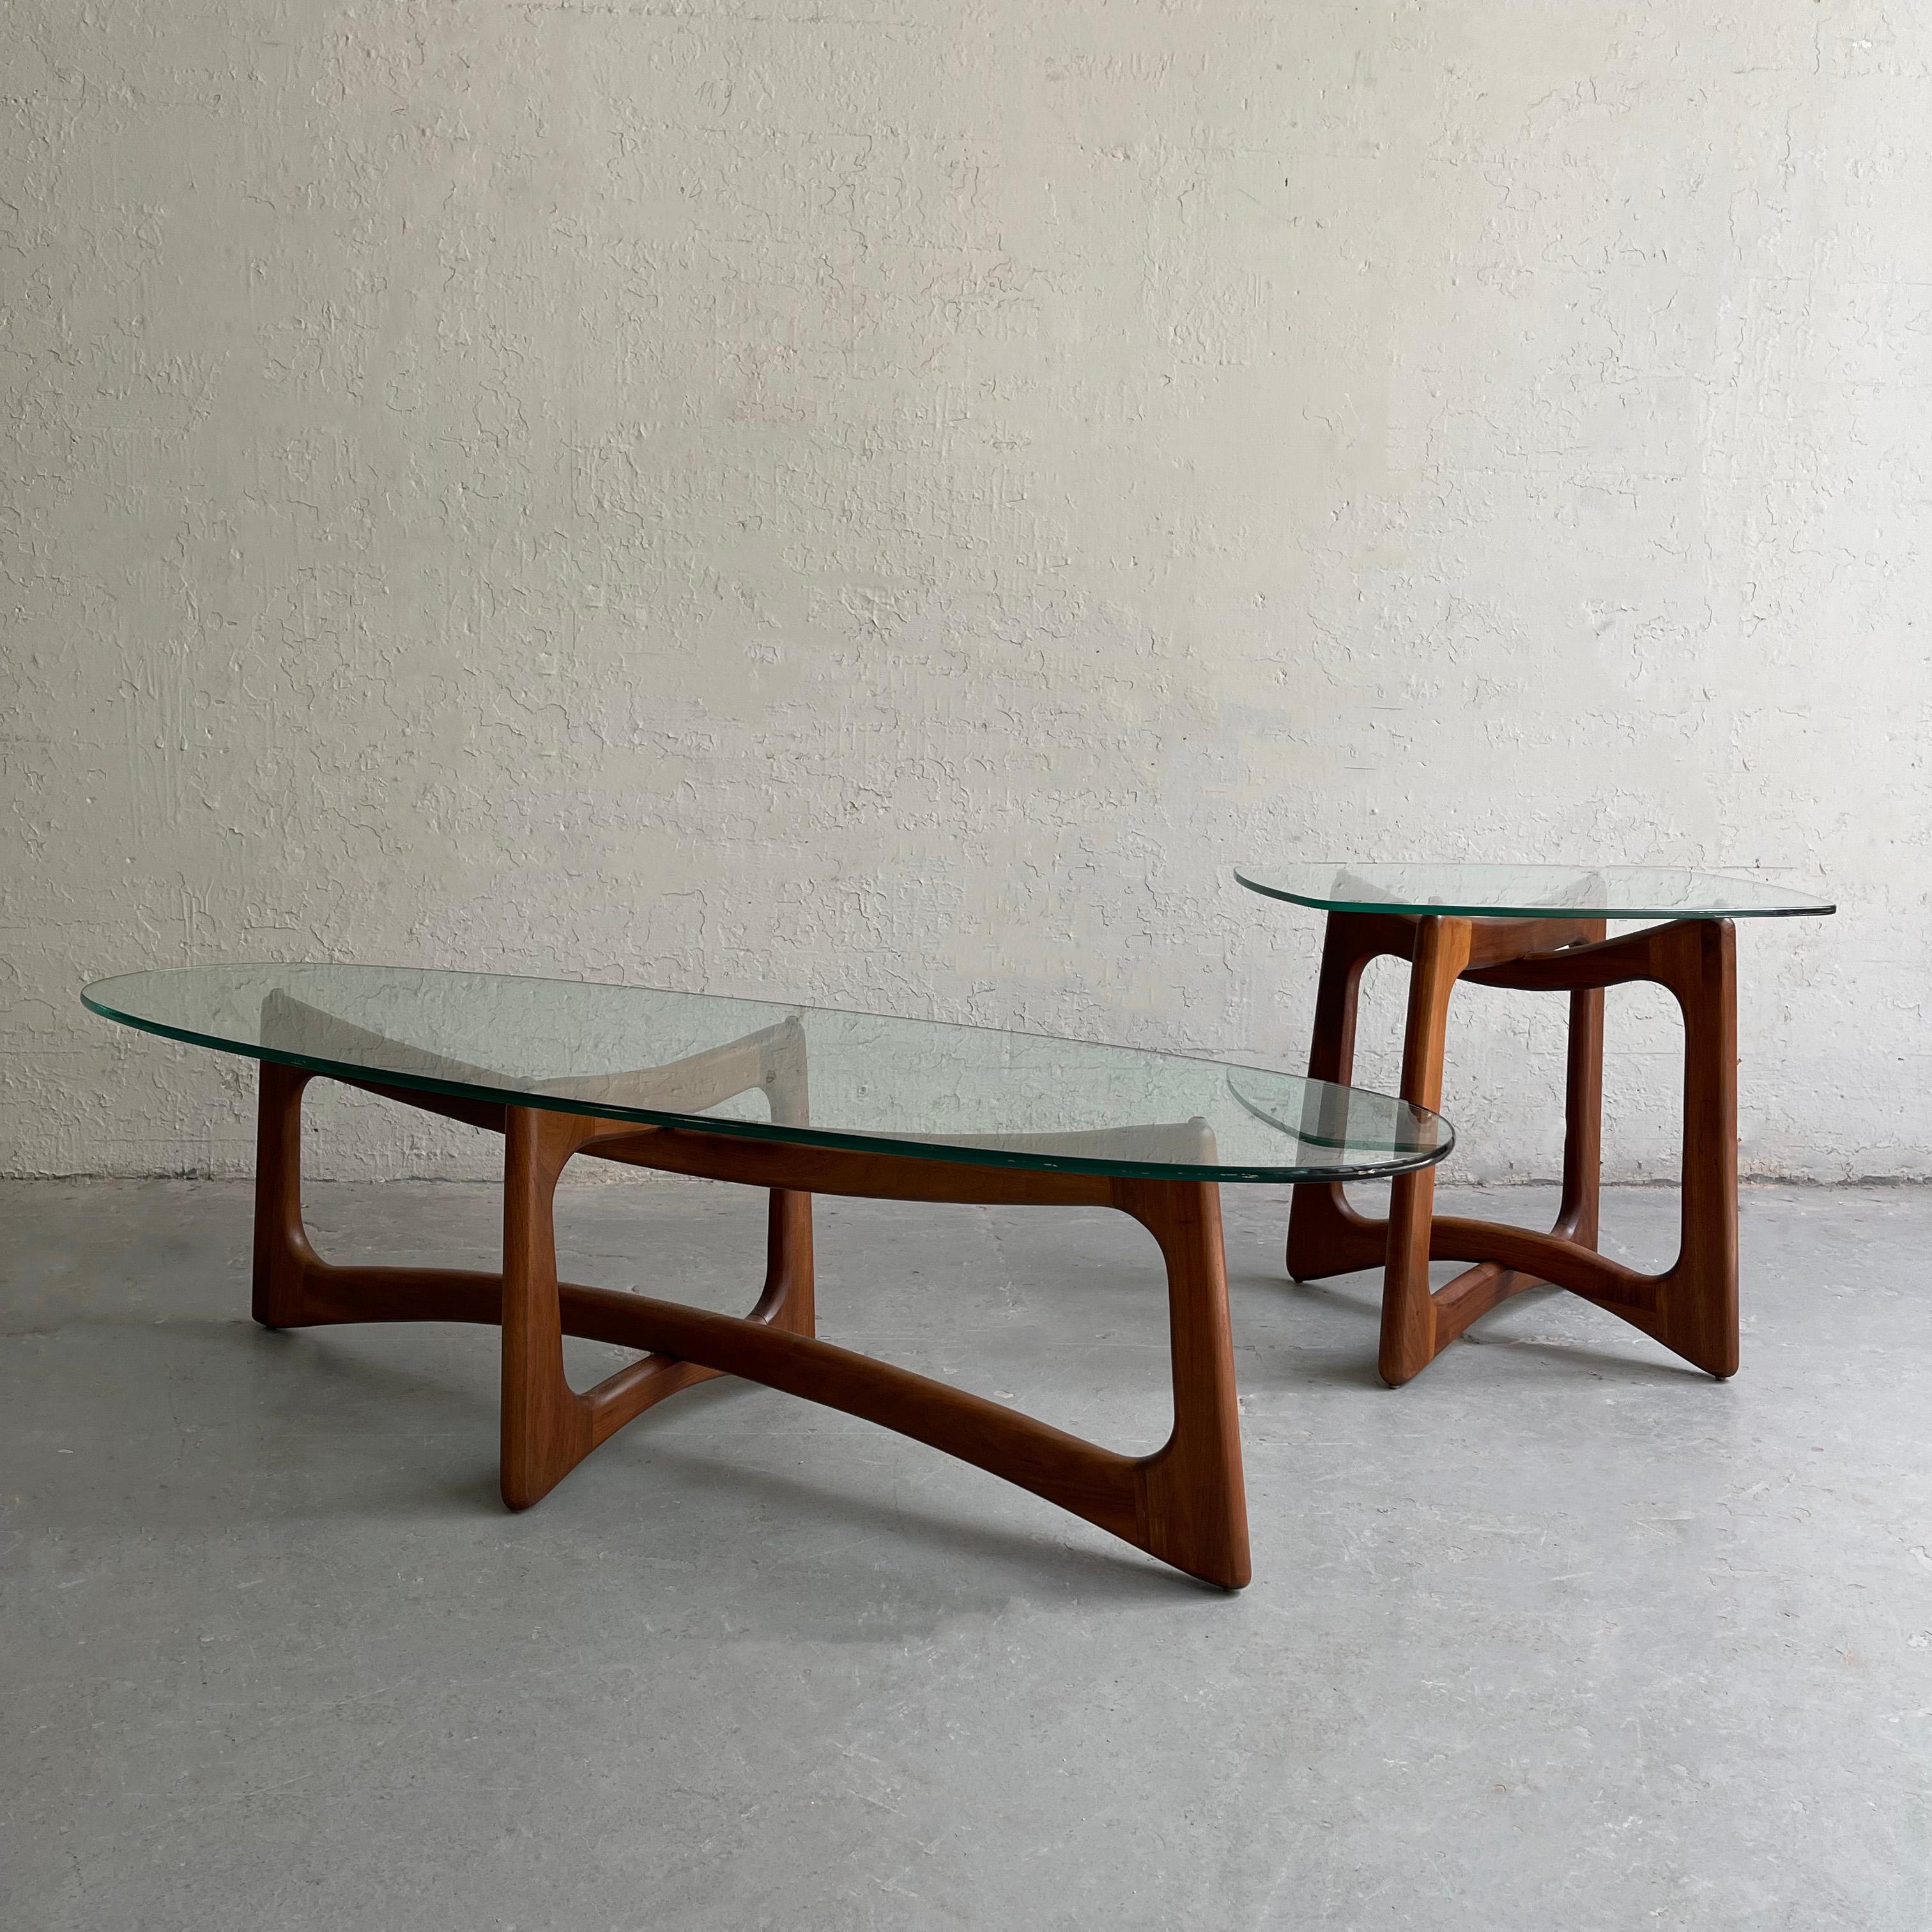 20th Century Sculptural Walnut Coffee Table By Adrian Pearsall, Craft Associates